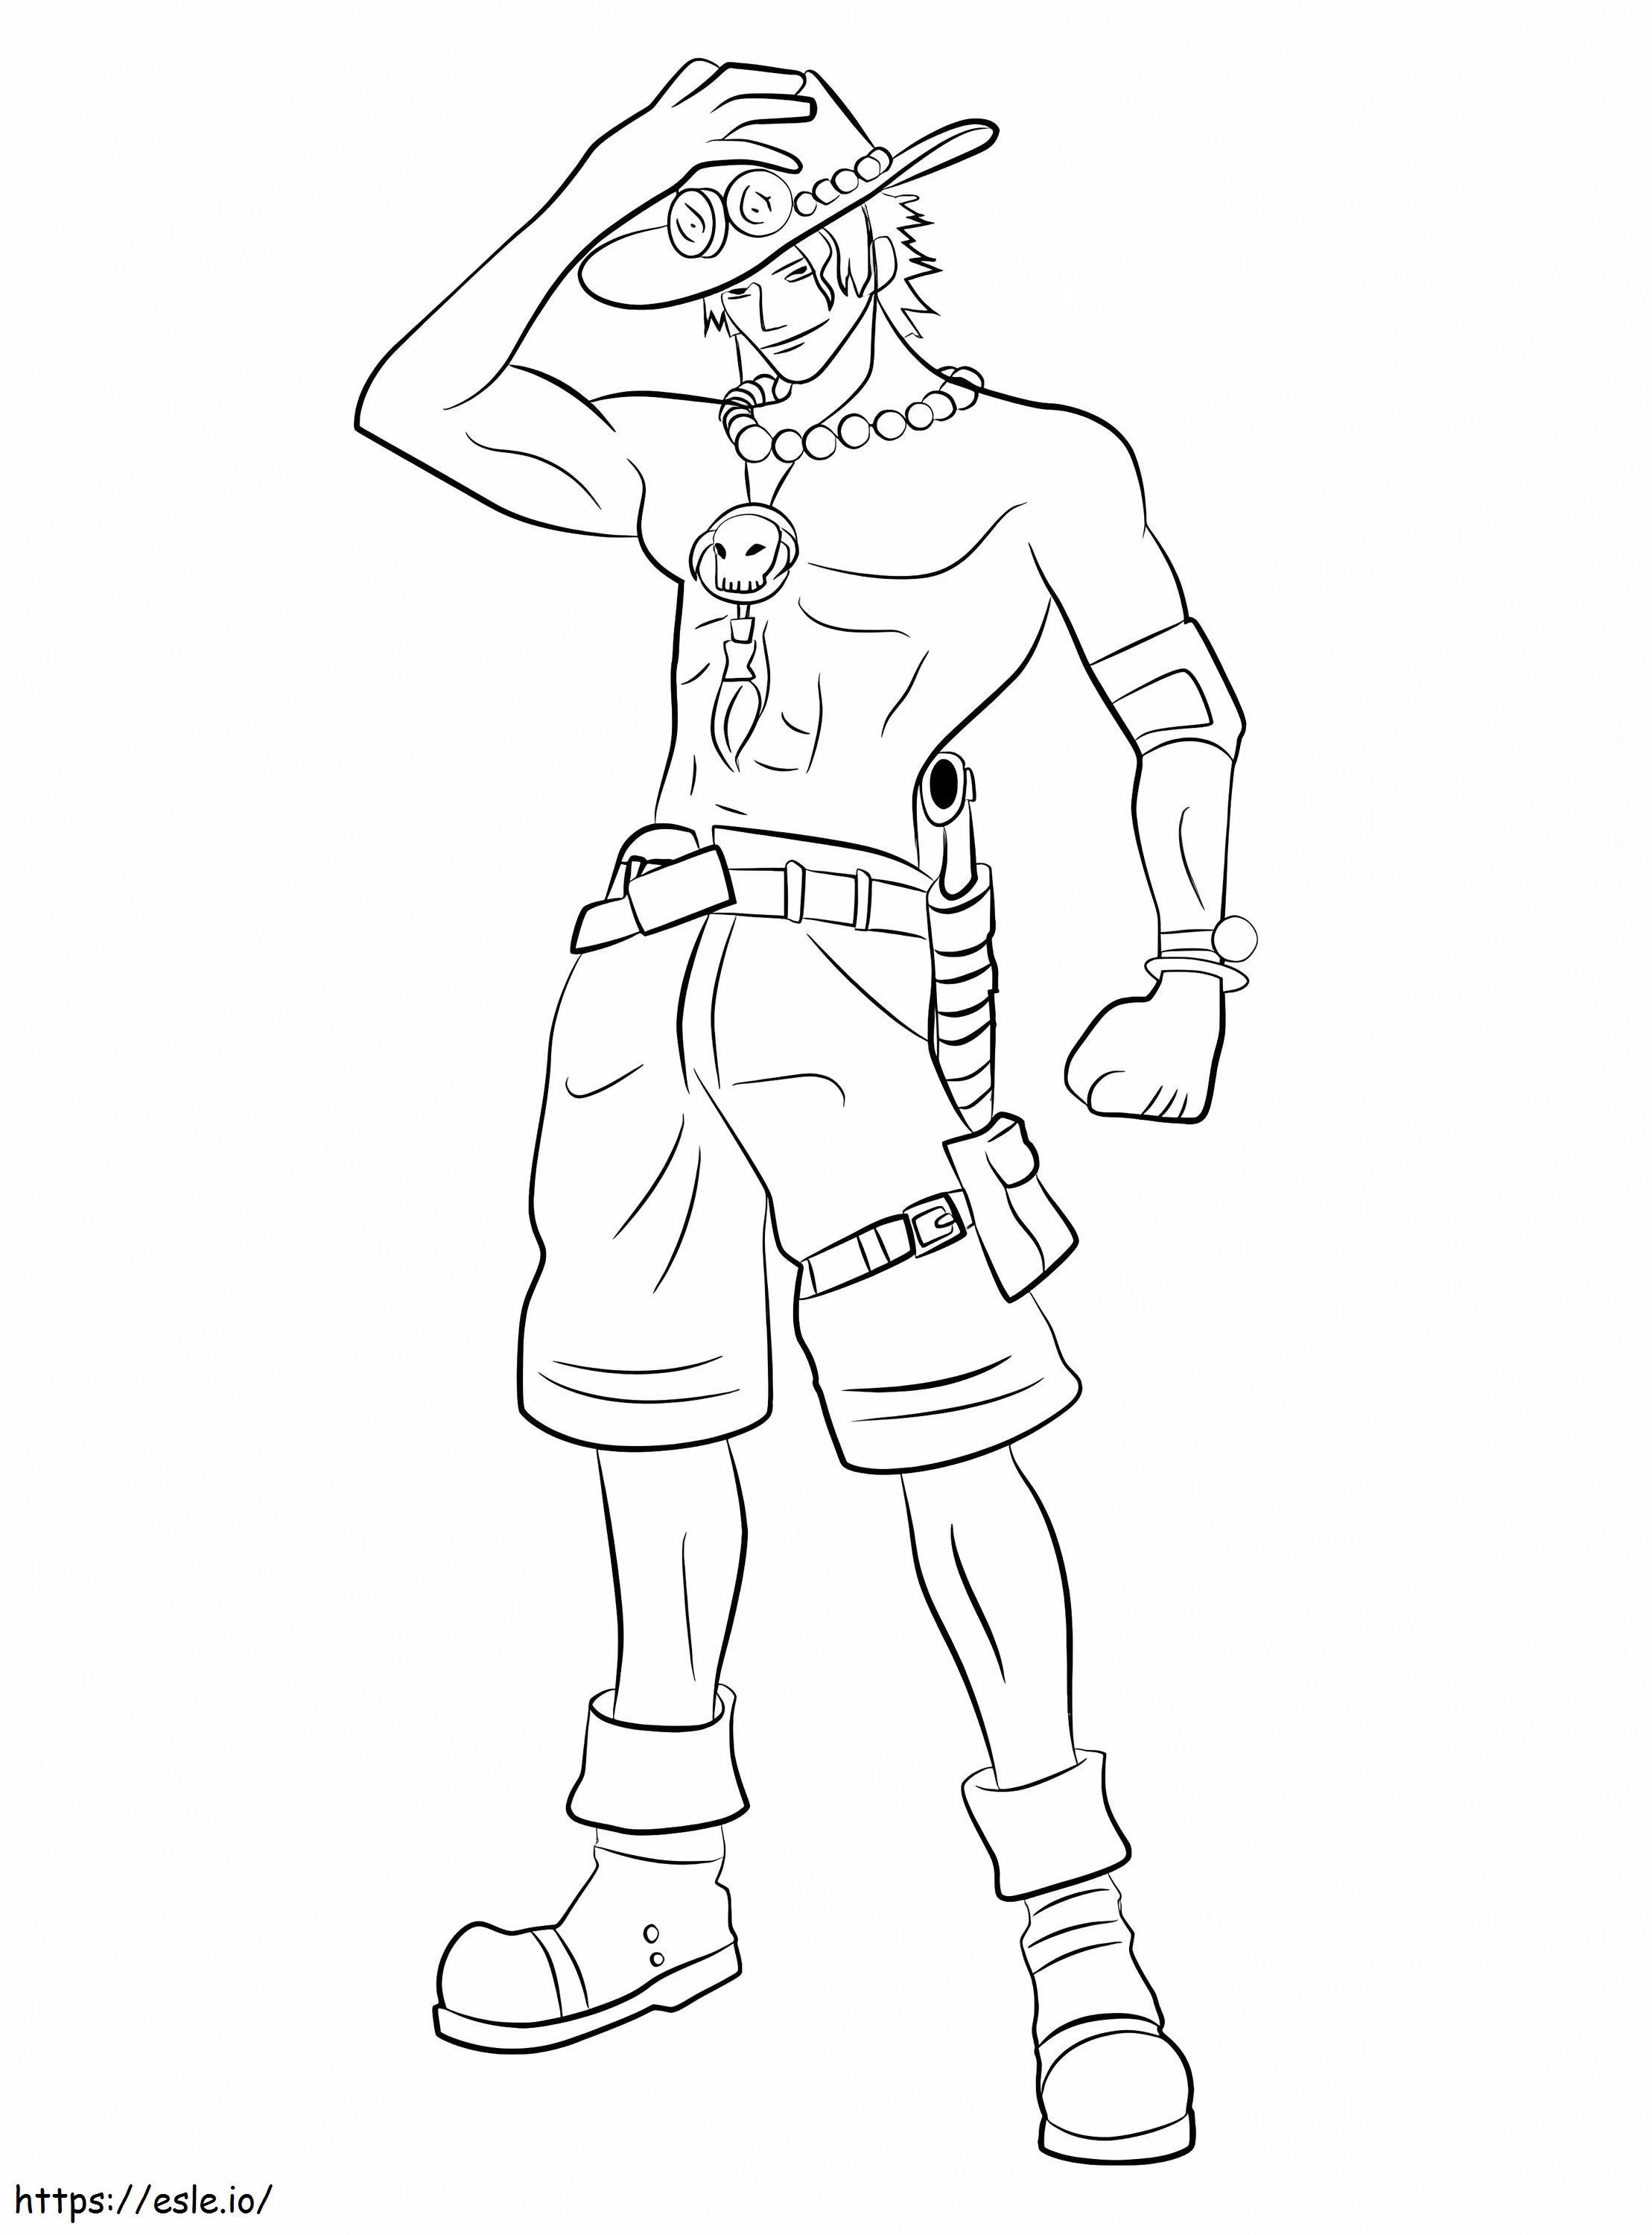 Ace One Piece coloring page